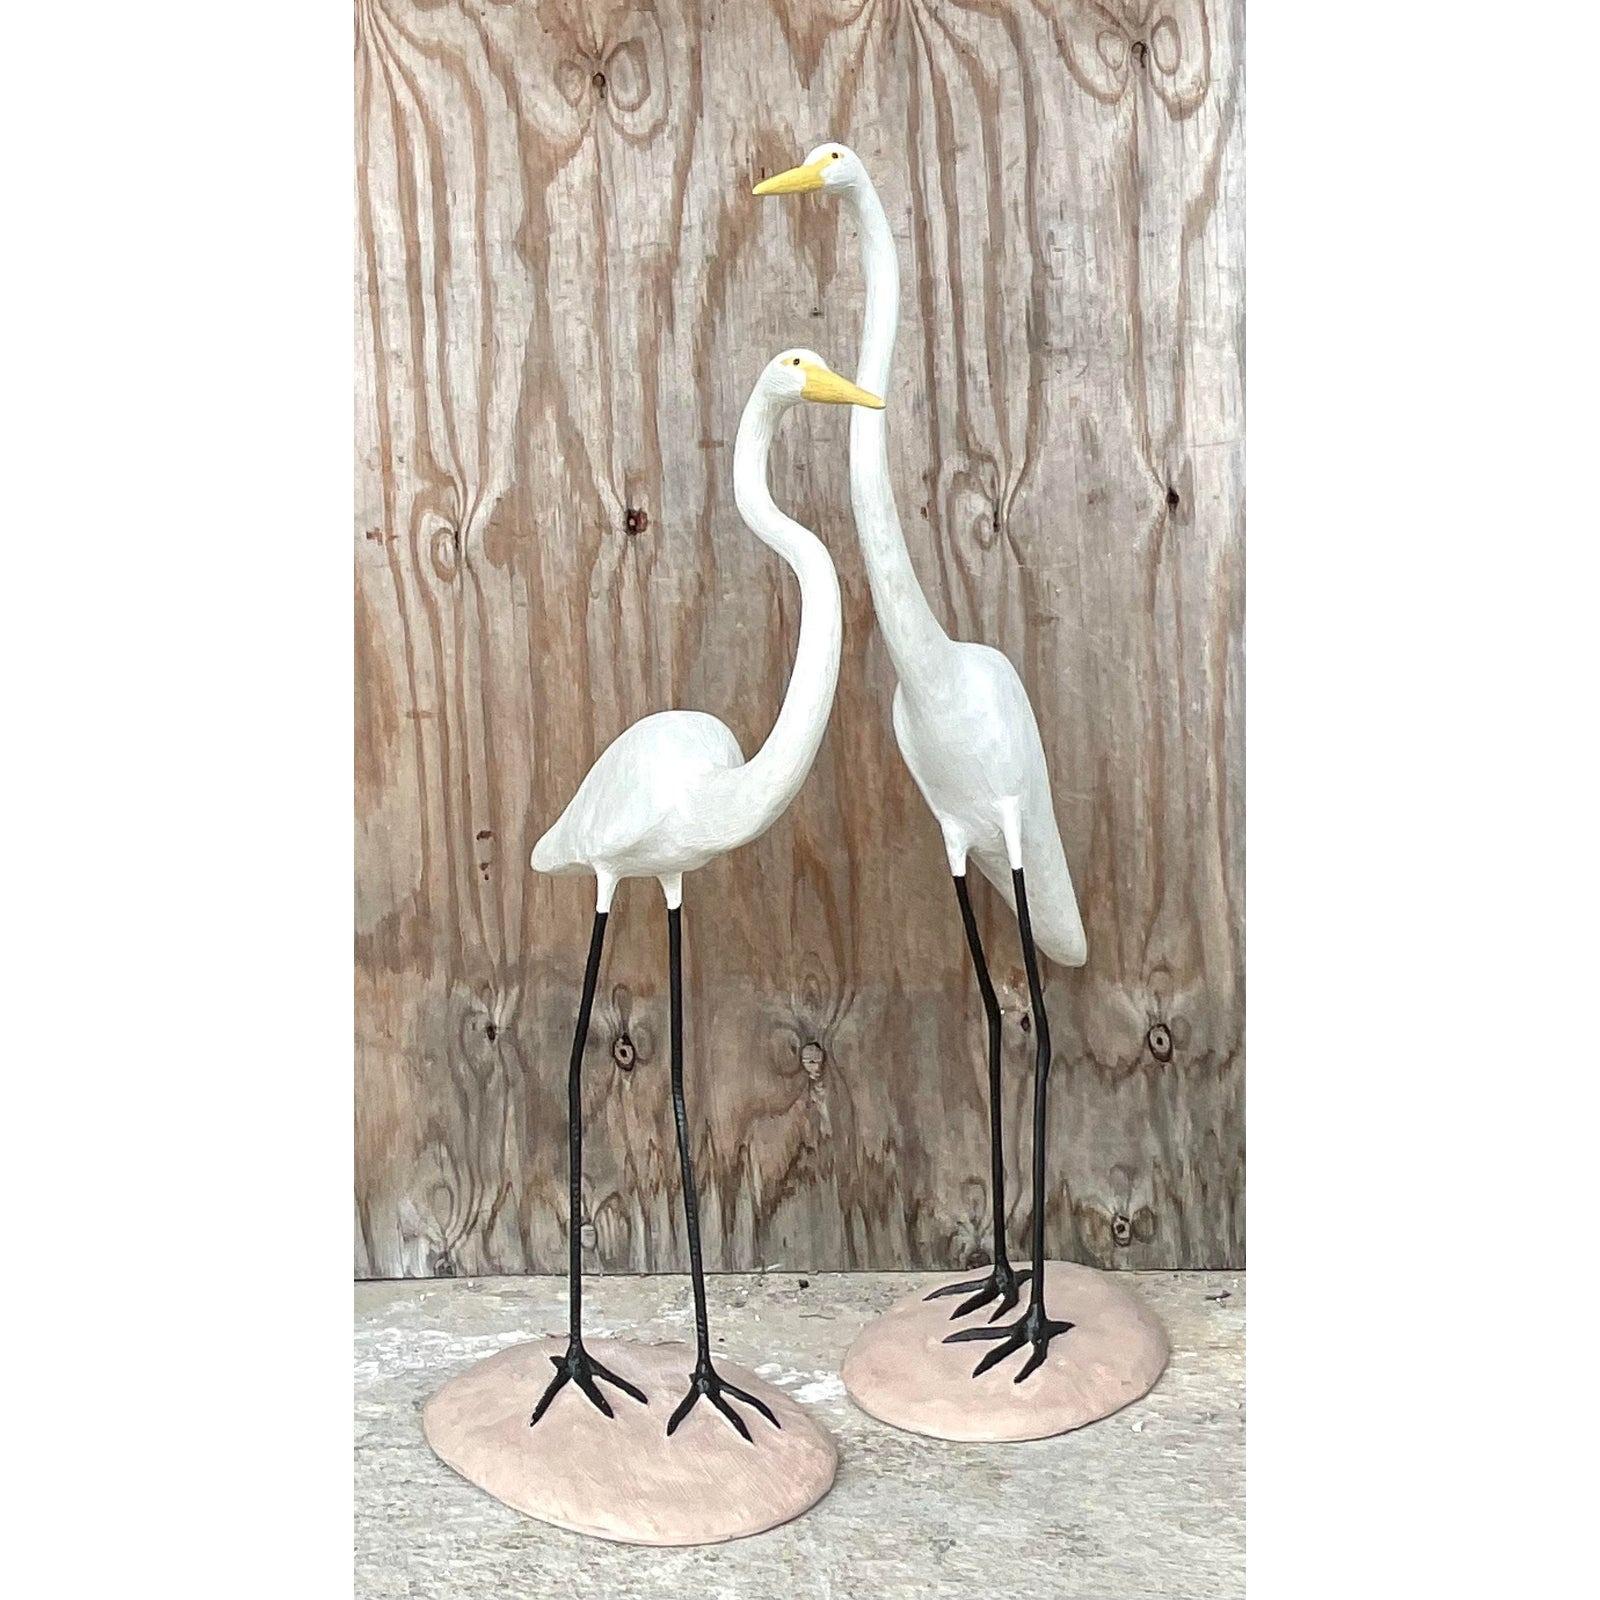 A handsome pair of vintage Coastal cranes. Beautifully hand painting on a concrete construction. Perfect indoors or outside. You decide! Acquired from a Palm Beach estate.

Lower crane 27x12x37 